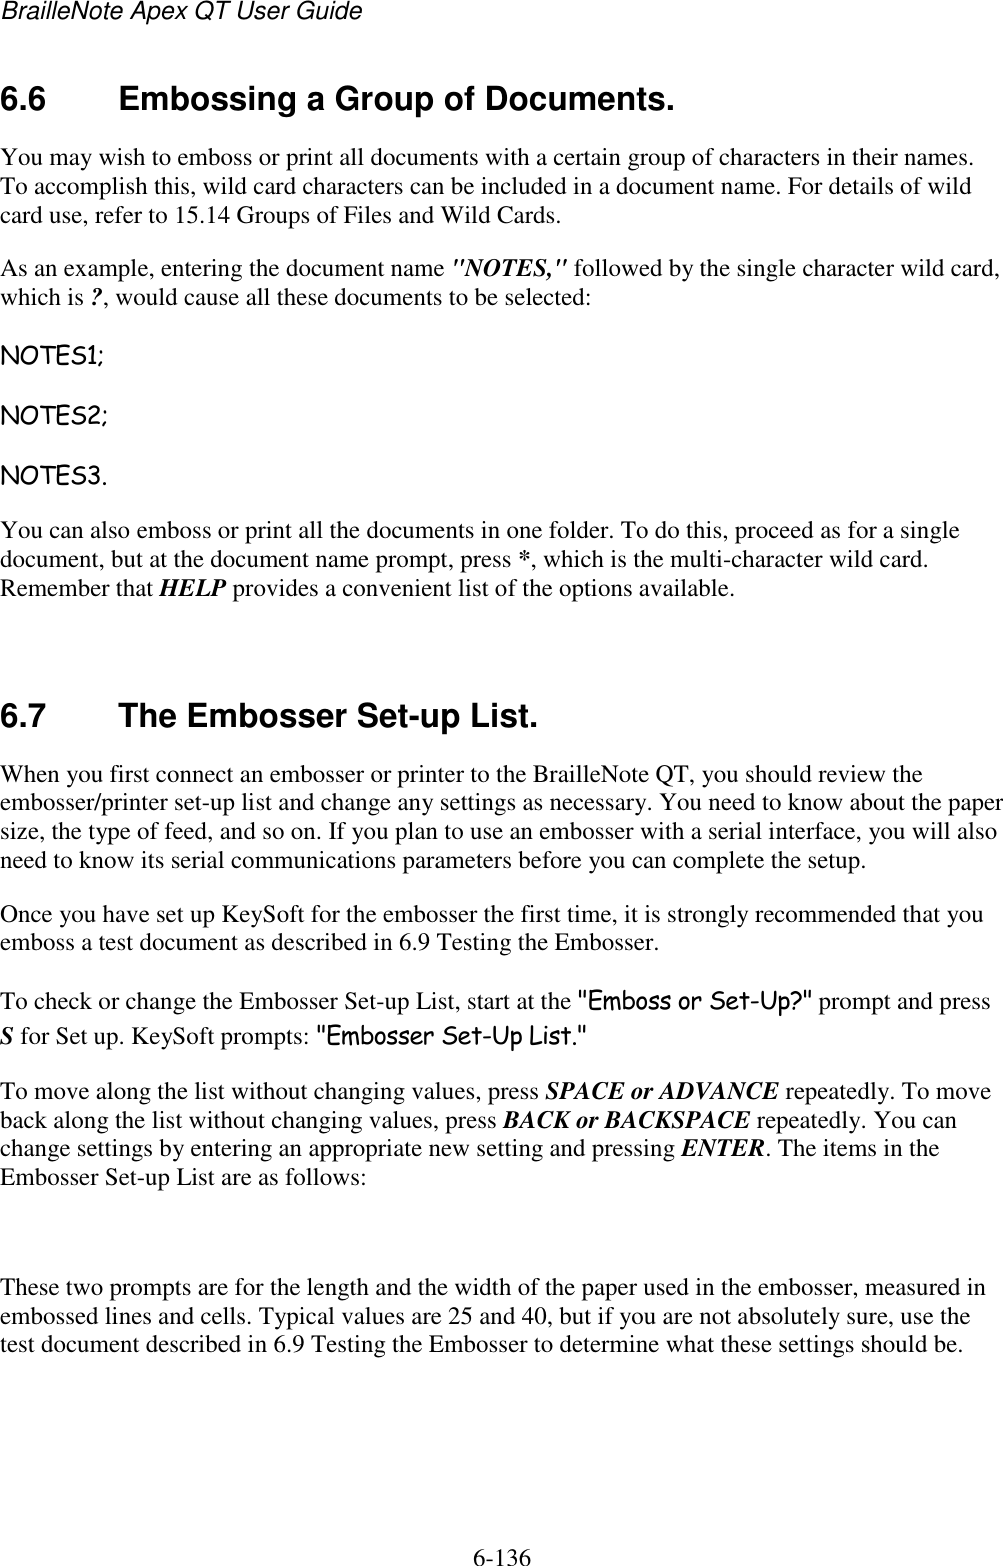 BrailleNote Apex QT User Guide  6-136   6.6  Embossing a Group of Documents. You may wish to emboss or print all documents with a certain group of characters in their names. To accomplish this, wild card characters can be included in a document name. For details of wild card use, refer to 15.14 Groups of Files and Wild Cards. As an example, entering the document name &quot;NOTES,&quot; followed by the single character wild card, which is ?, would cause all these documents to be selected: NOTES1; NOTES2; NOTES3. You can also emboss or print all the documents in one folder. To do this, proceed as for a single document, but at the document name prompt, press *, which is the multi-character wild card. Remember that HELP provides a convenient list of the options available.   6.7  The Embosser Set-up List. When you first connect an embosser or printer to the BrailleNote QT, you should review the embosser/printer set-up list and change any settings as necessary. You need to know about the paper size, the type of feed, and so on. If you plan to use an embosser with a serial interface, you will also need to know its serial communications parameters before you can complete the setup. Once you have set up KeySoft for the embosser the first time, it is strongly recommended that you emboss a test document as described in 6.9 Testing the Embosser. To check or change the Embosser Set-up List, start at the &quot;Emboss or Set-Up?&quot; prompt and press S for Set up. KeySoft prompts: &quot;Embosser Set-Up List.&quot; To move along the list without changing values, press SPACE or ADVANCE repeatedly. To move back along the list without changing values, press BACK or BACKSPACE repeatedly. You can change settings by entering an appropriate new setting and pressing ENTER. The items in the Embosser Set-up List are as follows:   These two prompts are for the length and the width of the paper used in the embosser, measured in embossed lines and cells. Typical values are 25 and 40, but if you are not absolutely sure, use the test document described in 6.9 Testing the Embosser to determine what these settings should be.   